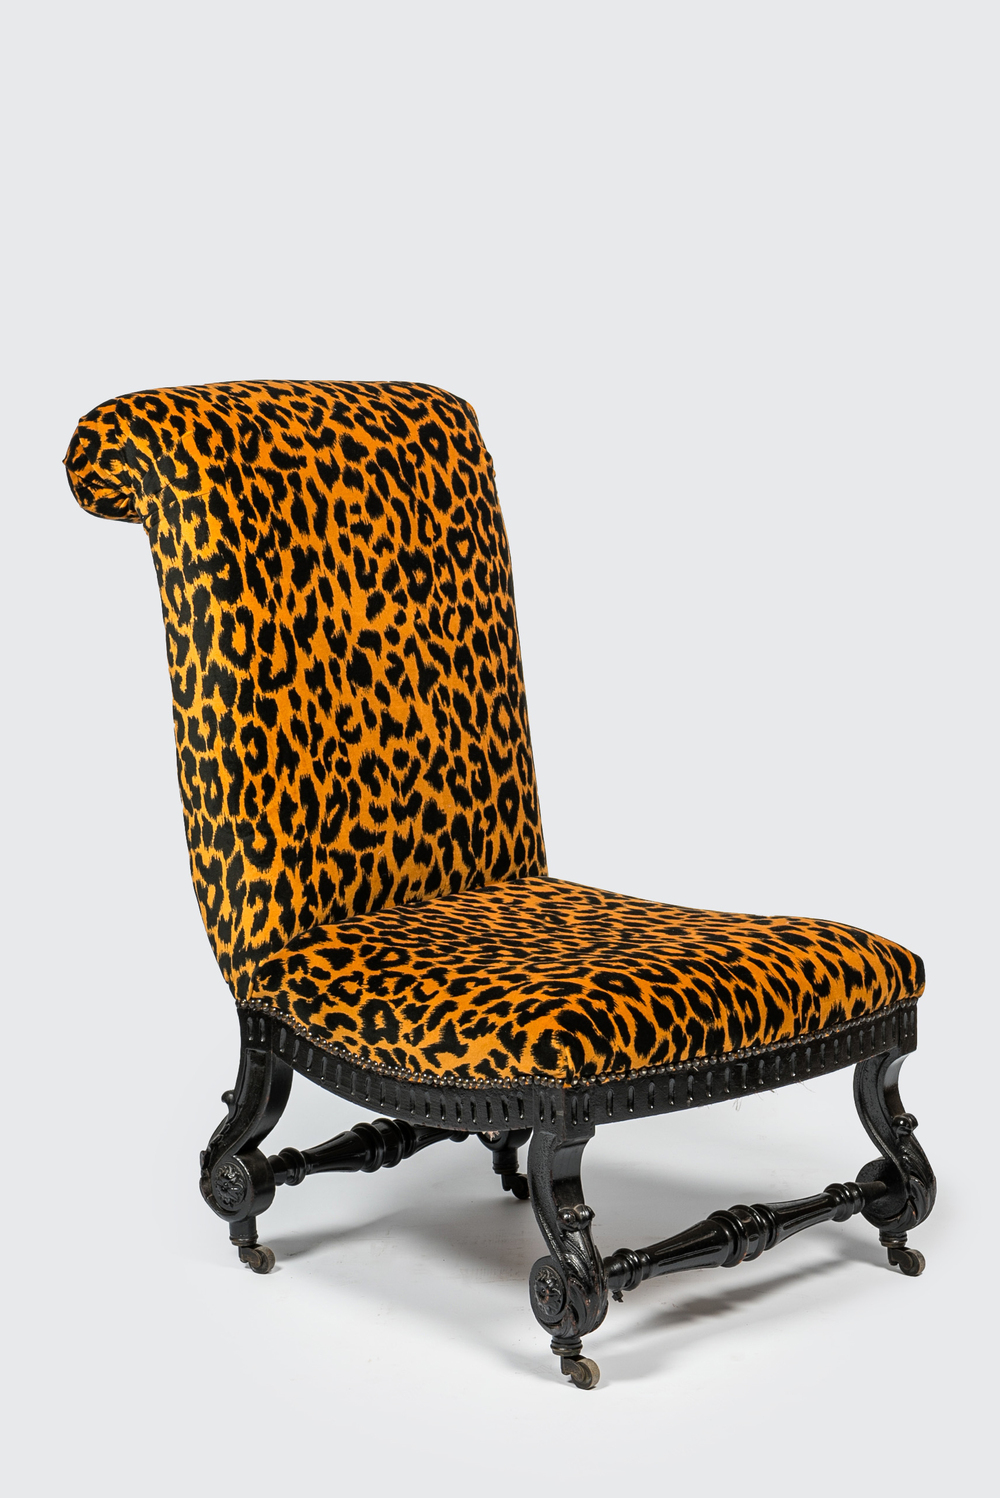 An ebonised wooden 'leopard design' chair on wheels, 19/20th C.